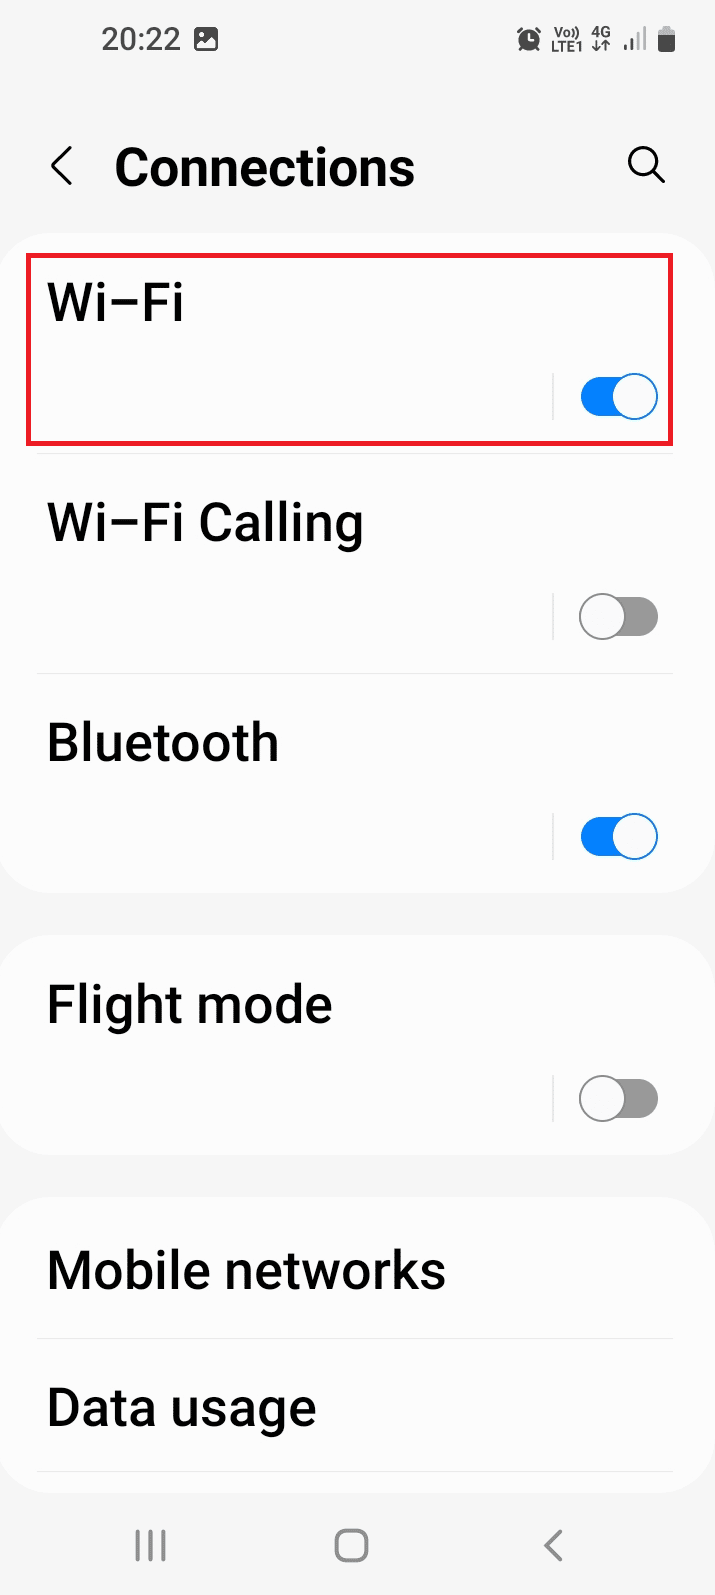 Tap on the WiFi option